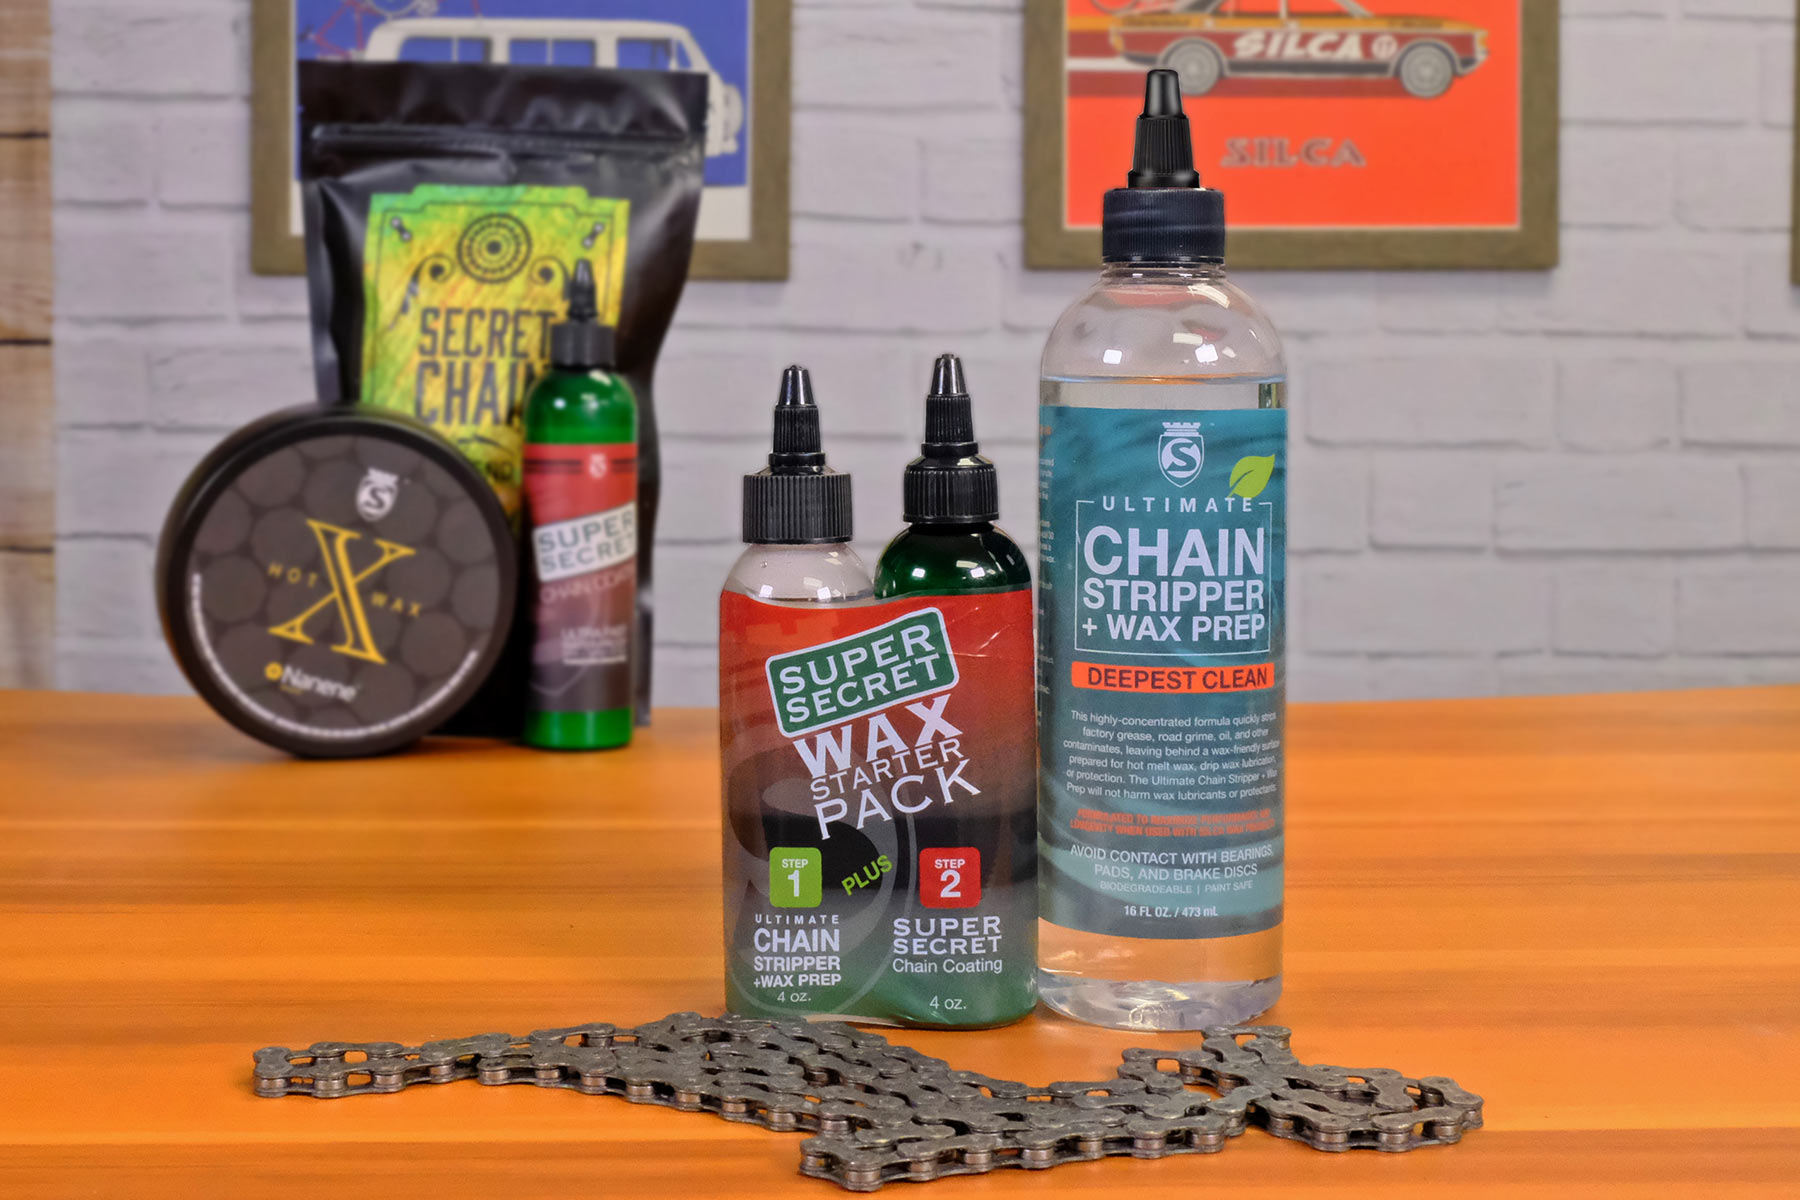 Silca Strips at Unbound: The Ultimate Chain Stripper and Wax Prep To Go Faster